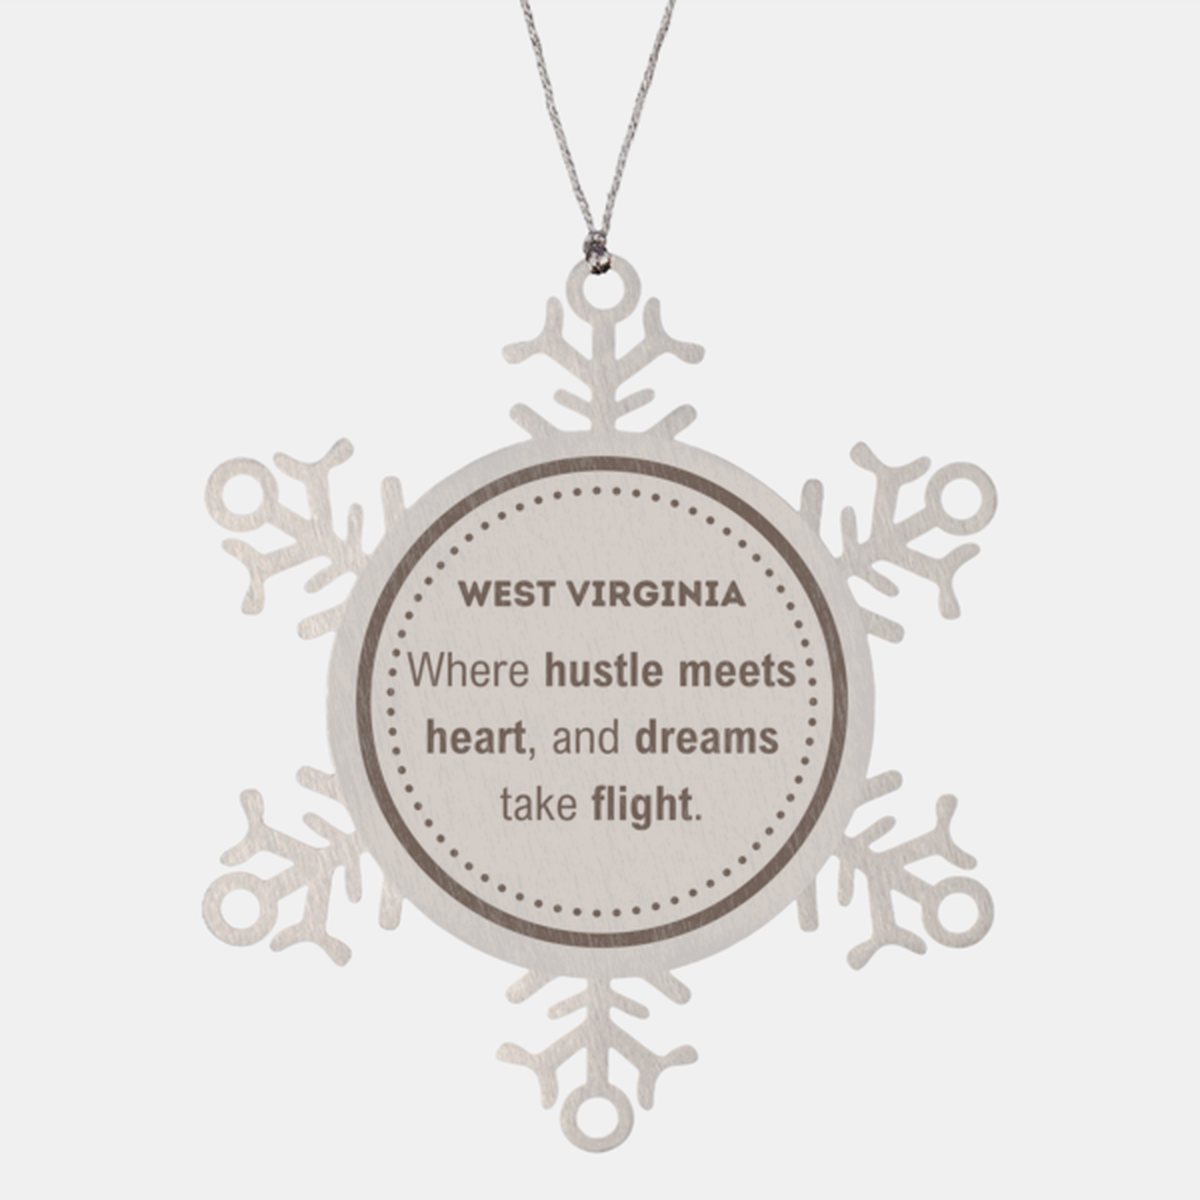 West Virginia: Where hustle meets heart, and dreams take flight, West Virginia Ornament Gifts, Proud West Virginia Christmas West Virginia Snowflake Ornament, West Virginia State People, Men, Women, Friends